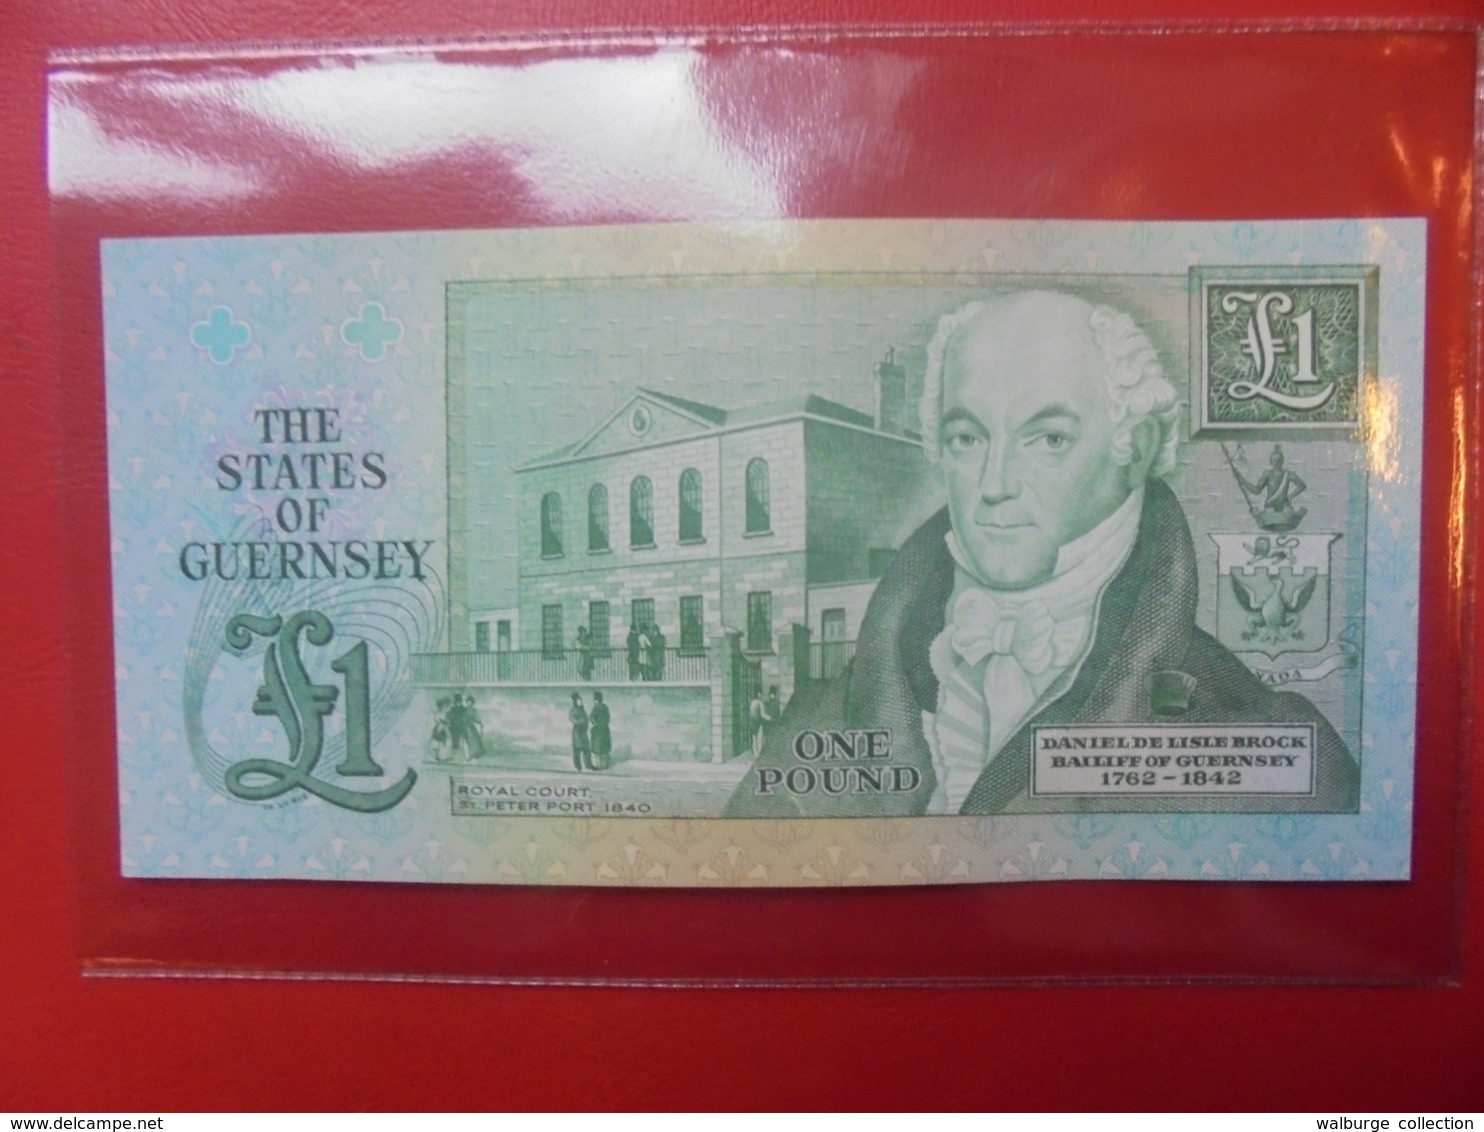 GUERNESEY ONE POUND 1980-89 PEU CIRCULER/NEUF (B.9) - Guernesey